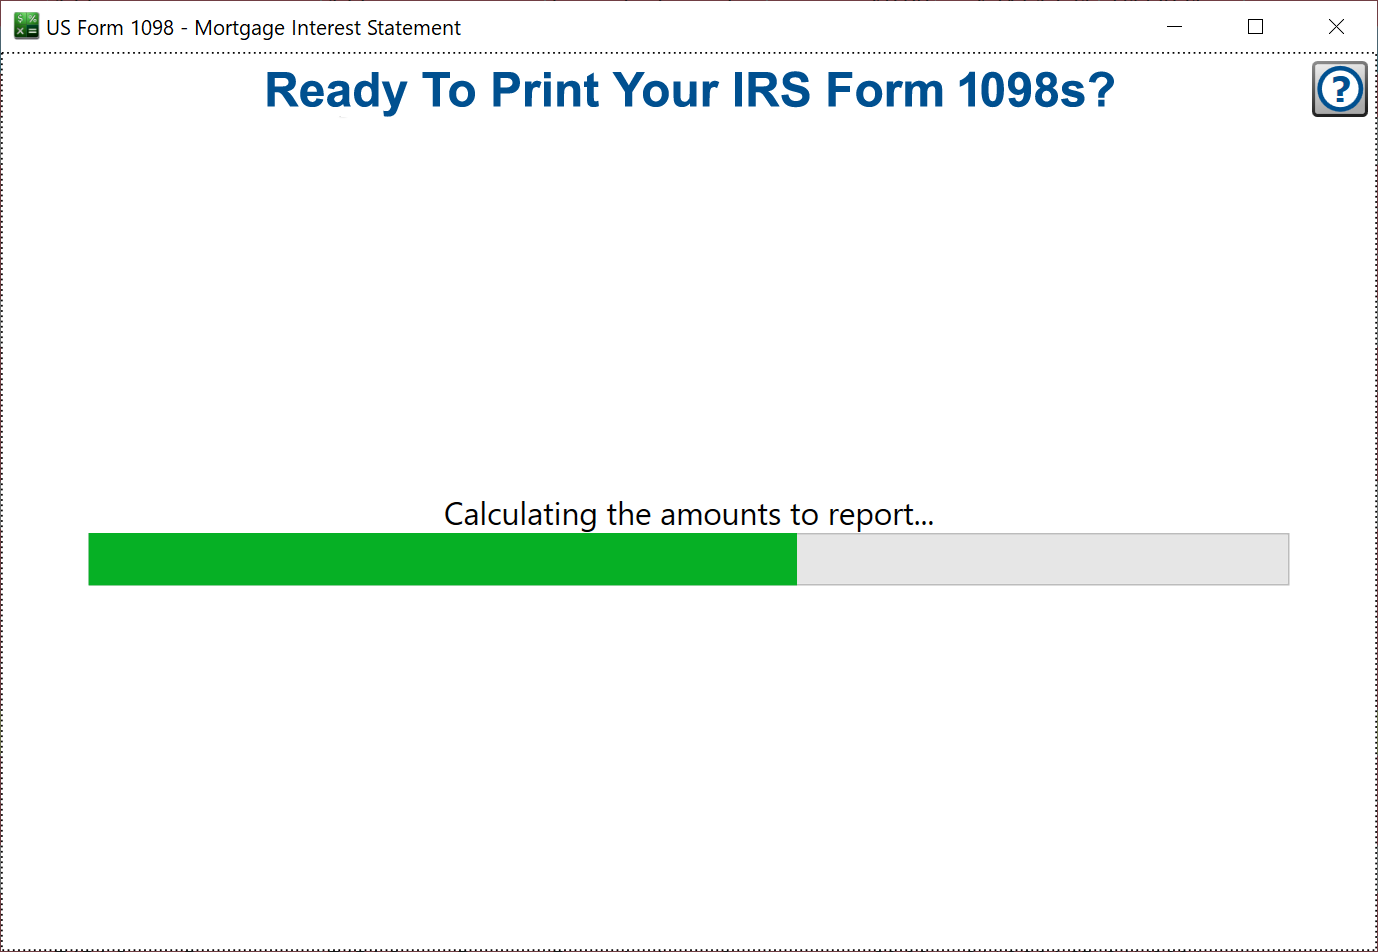 how to print form 1098s